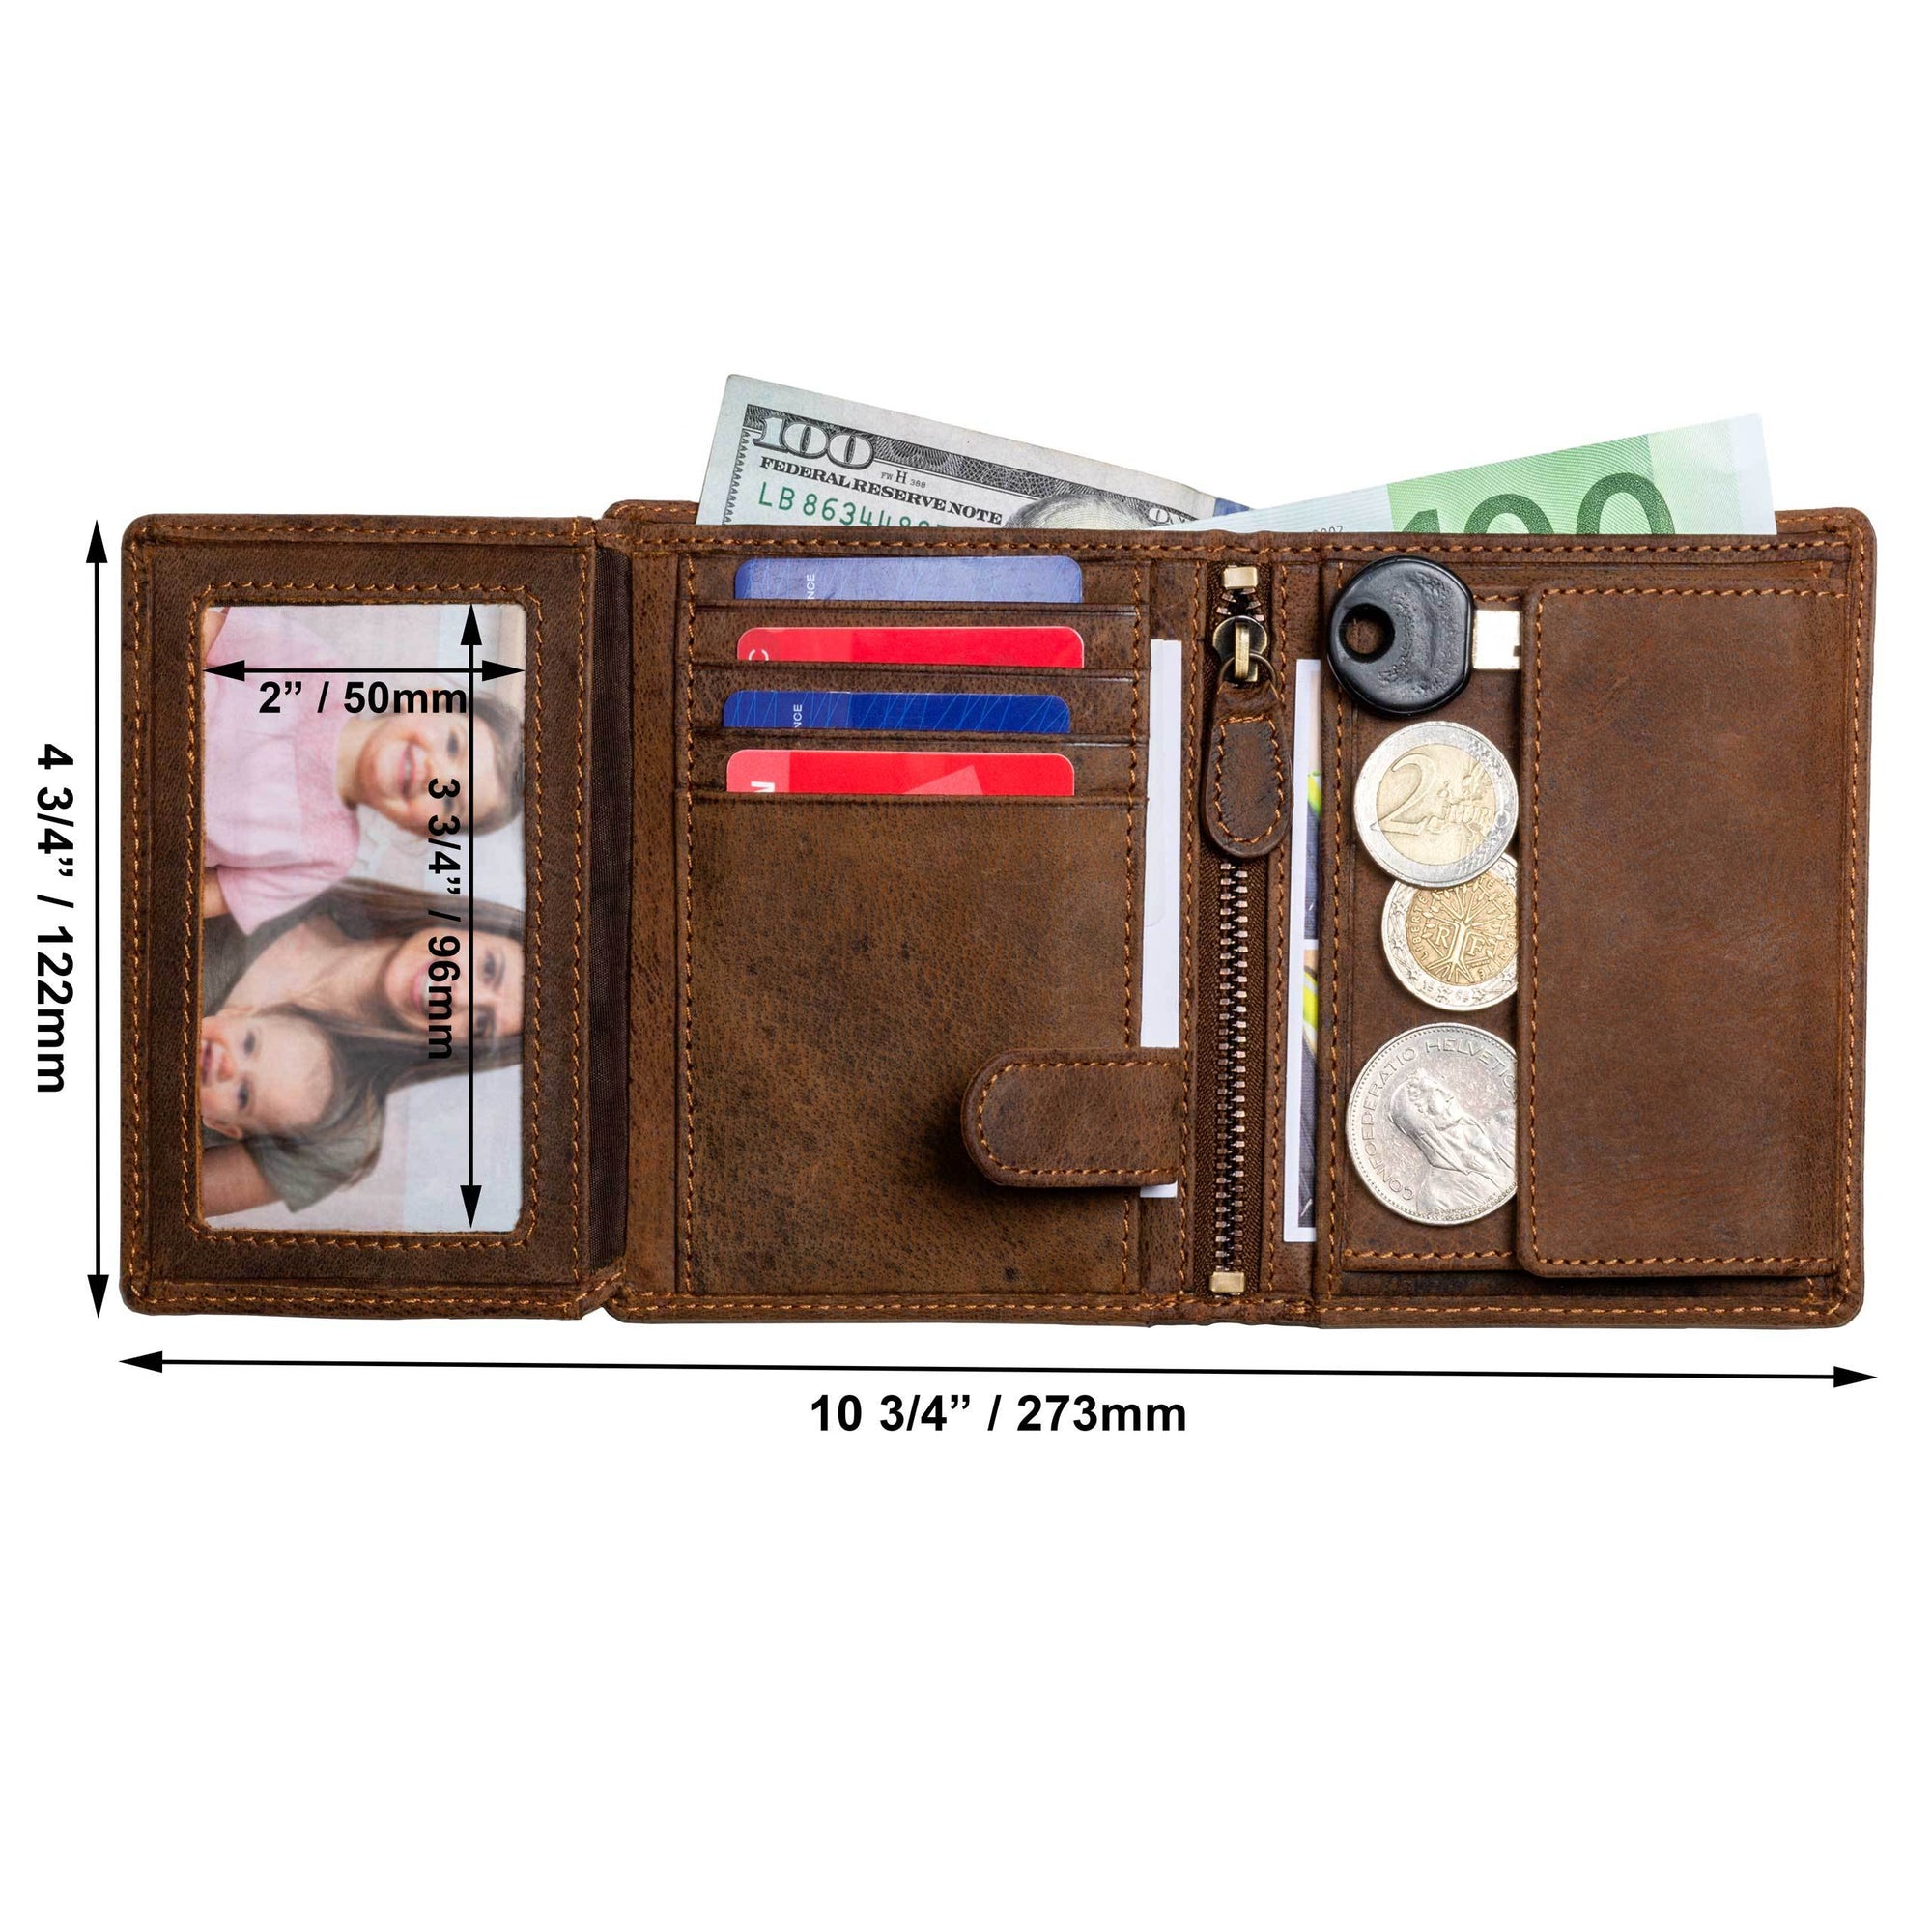 DiLoro Men's Vertical Leather Bifold Flip ID Zip Coin Wallet Dark Hunter Brown RFID Blocking Technology - Inside, Open View with Dimensions